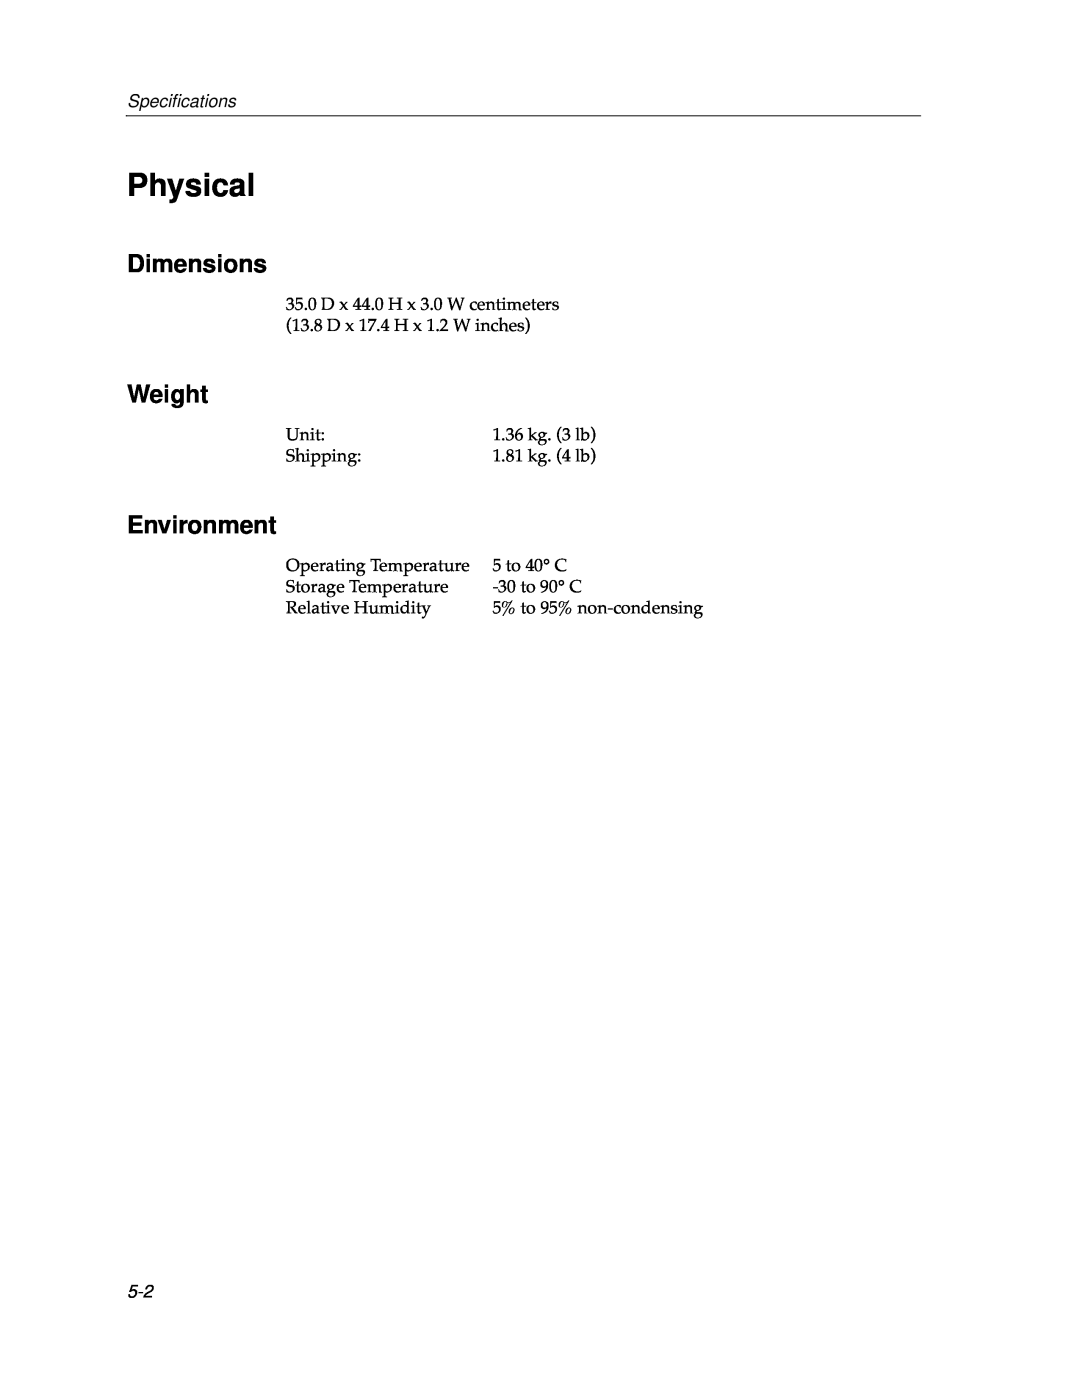 Cabletron Systems 9F106-01 manual Physical, Dimensions, Weight, Environment, Speciﬁcations 